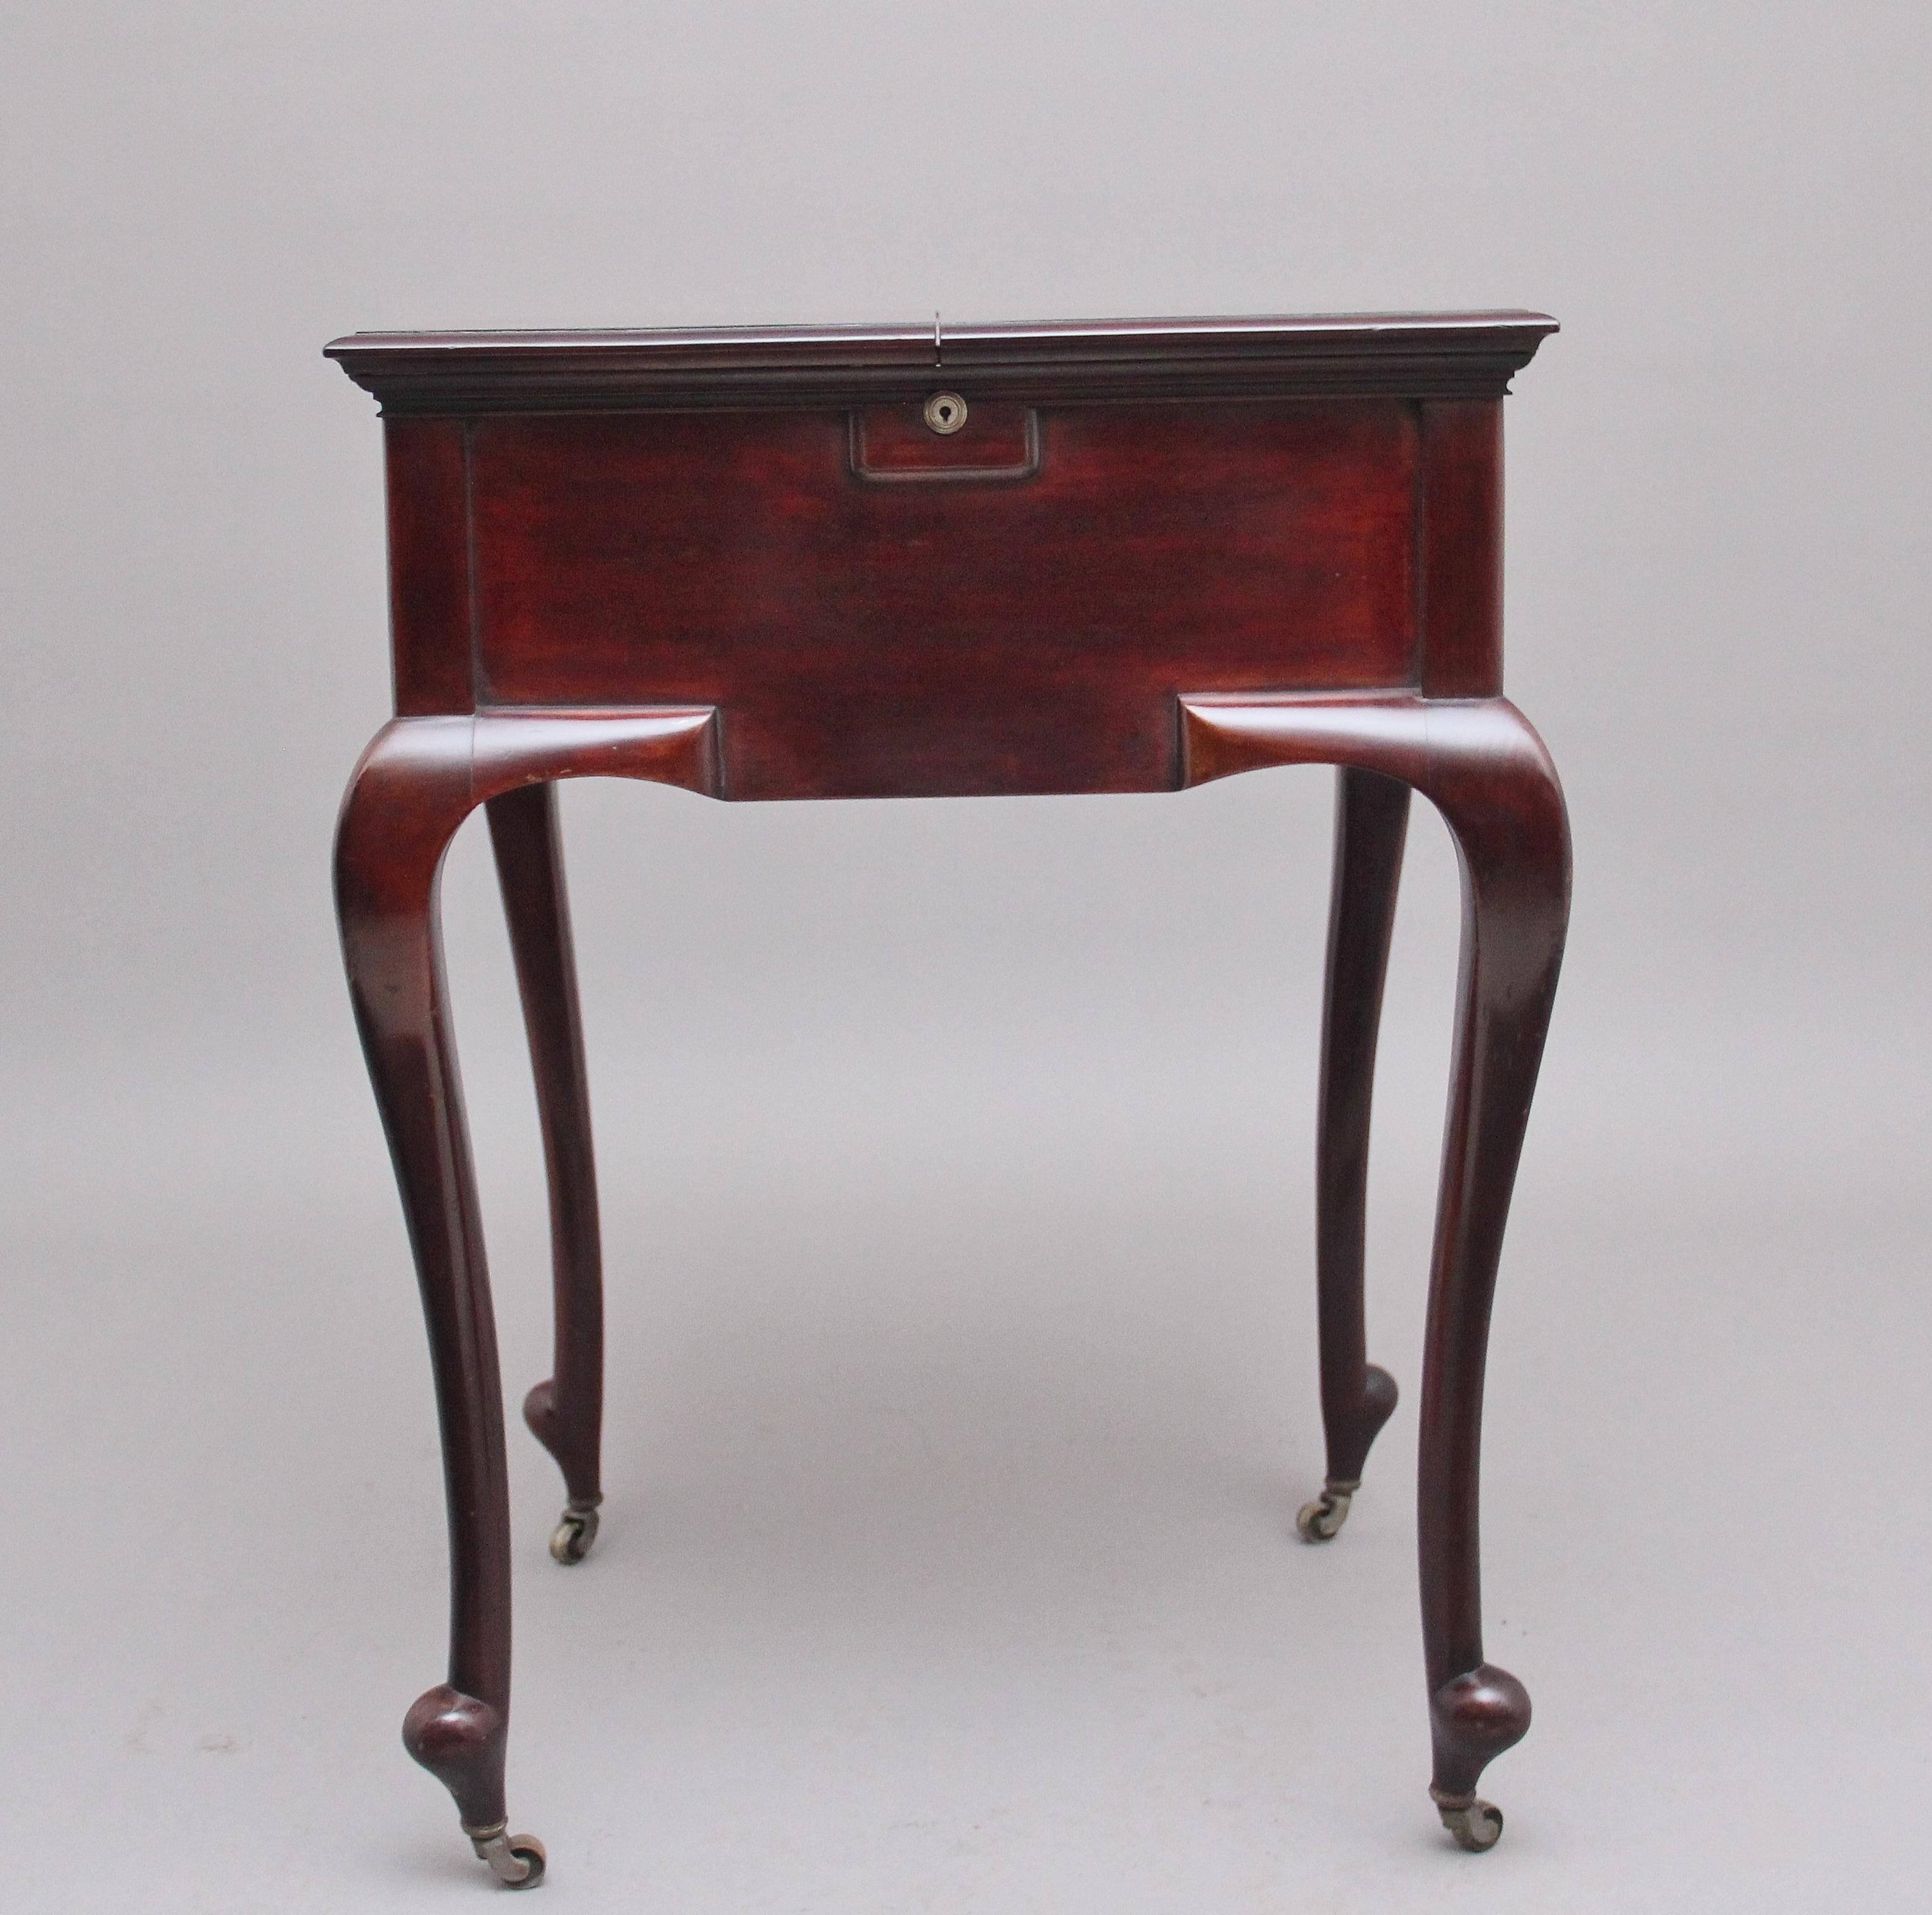 Early 20th century mahogany metamorphic writing table by J.C Vickery of Regent St, London, the moulded edge hinged top lifting up and folding over to reveal the rising writing desk top, which consists of various writing instruments including ink